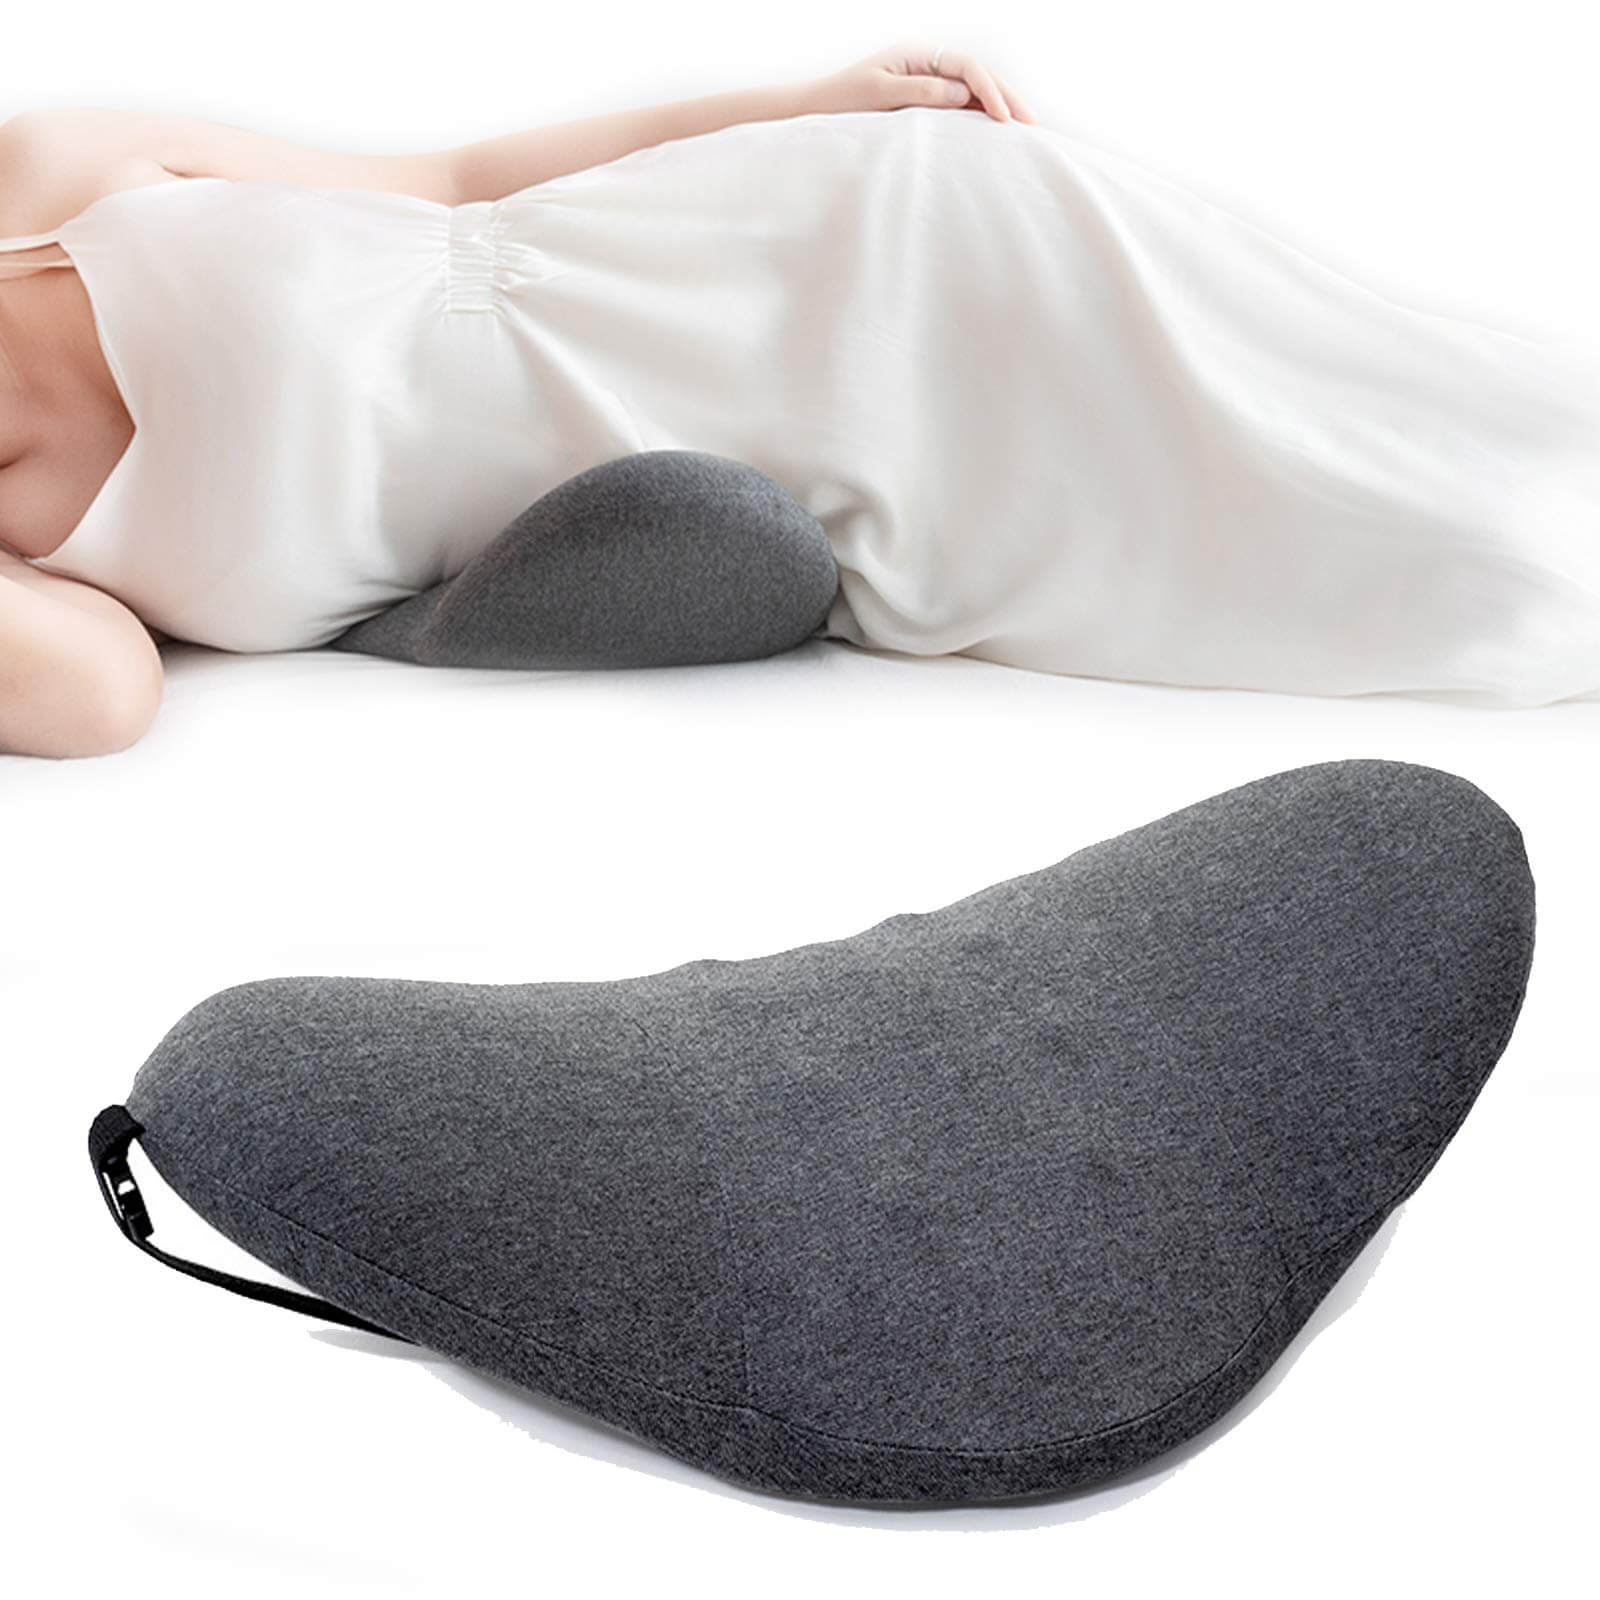 BBL Pillow for Sleeping, Driving Cars/Plane, After Surgery on Recovery, on bed